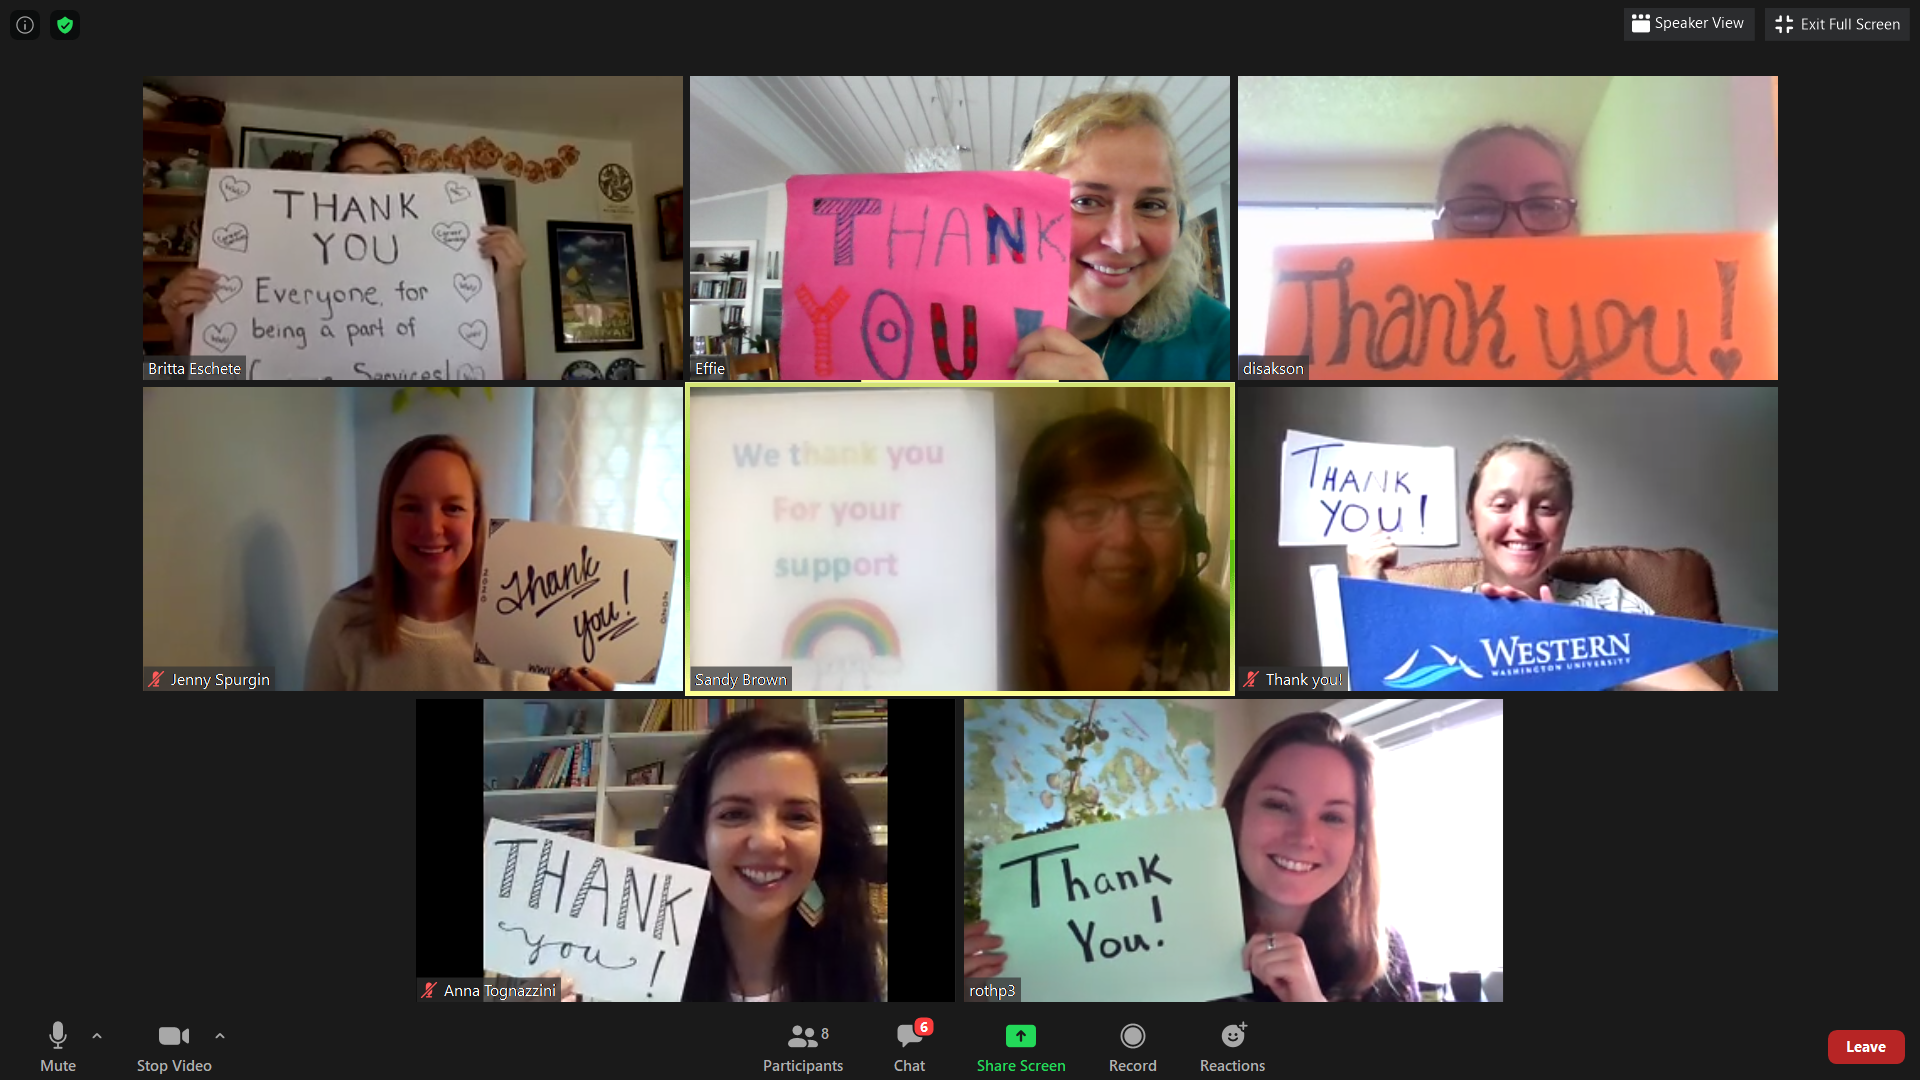 Career Services Center staff on zoom holding handwritten "thank you" signs